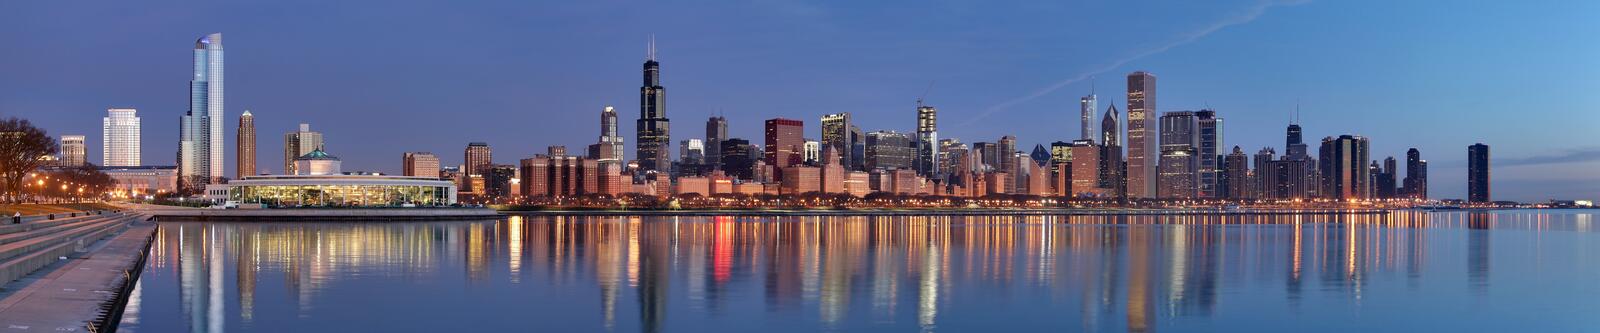 Free photo Panorama of Chicago with skyscrapers on the bay